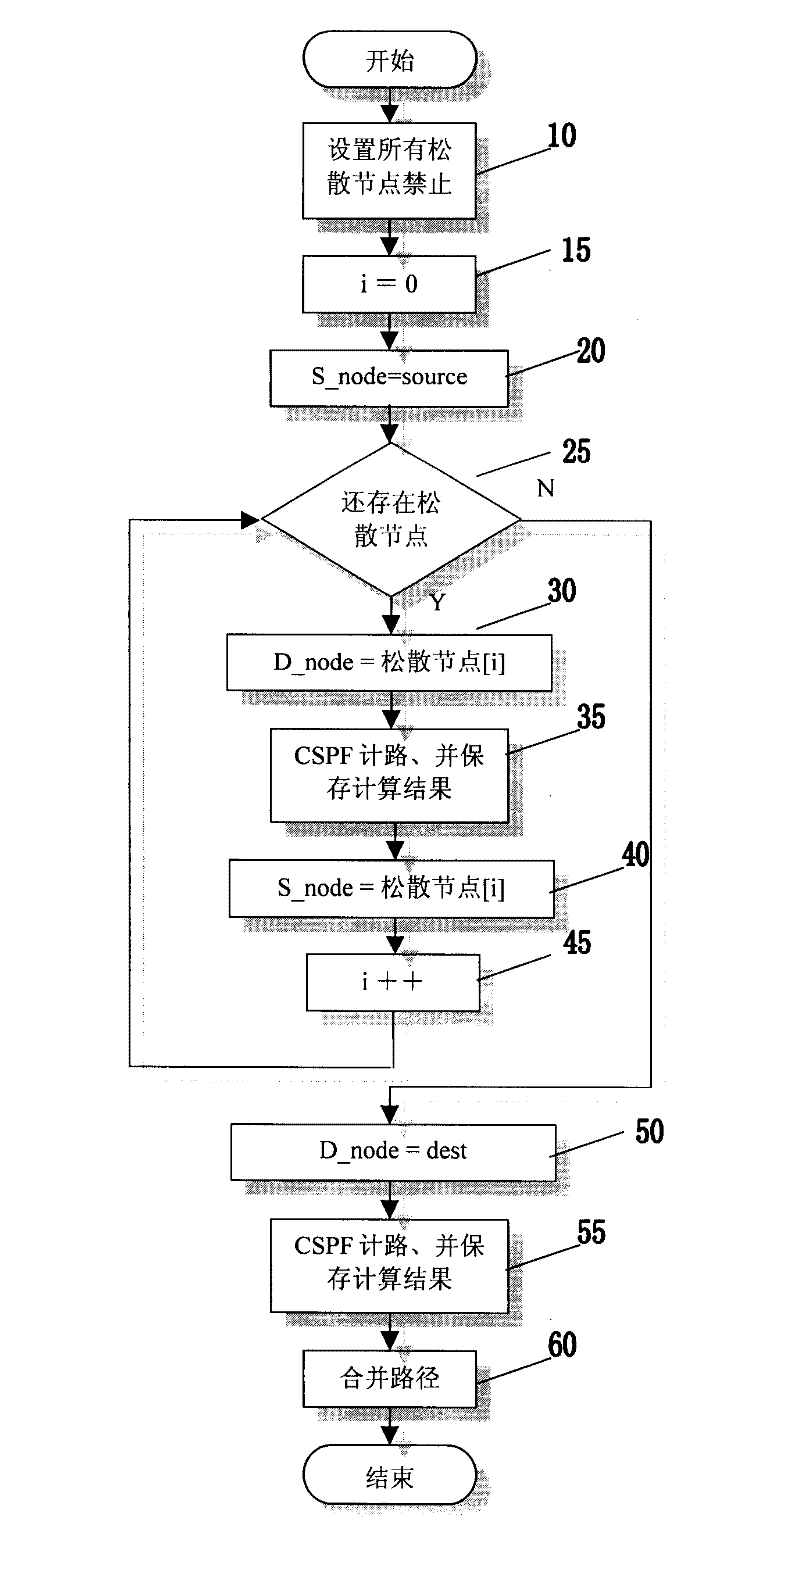 Method and apparatus for obtaining constrained path of loose routing in intelligent optical network